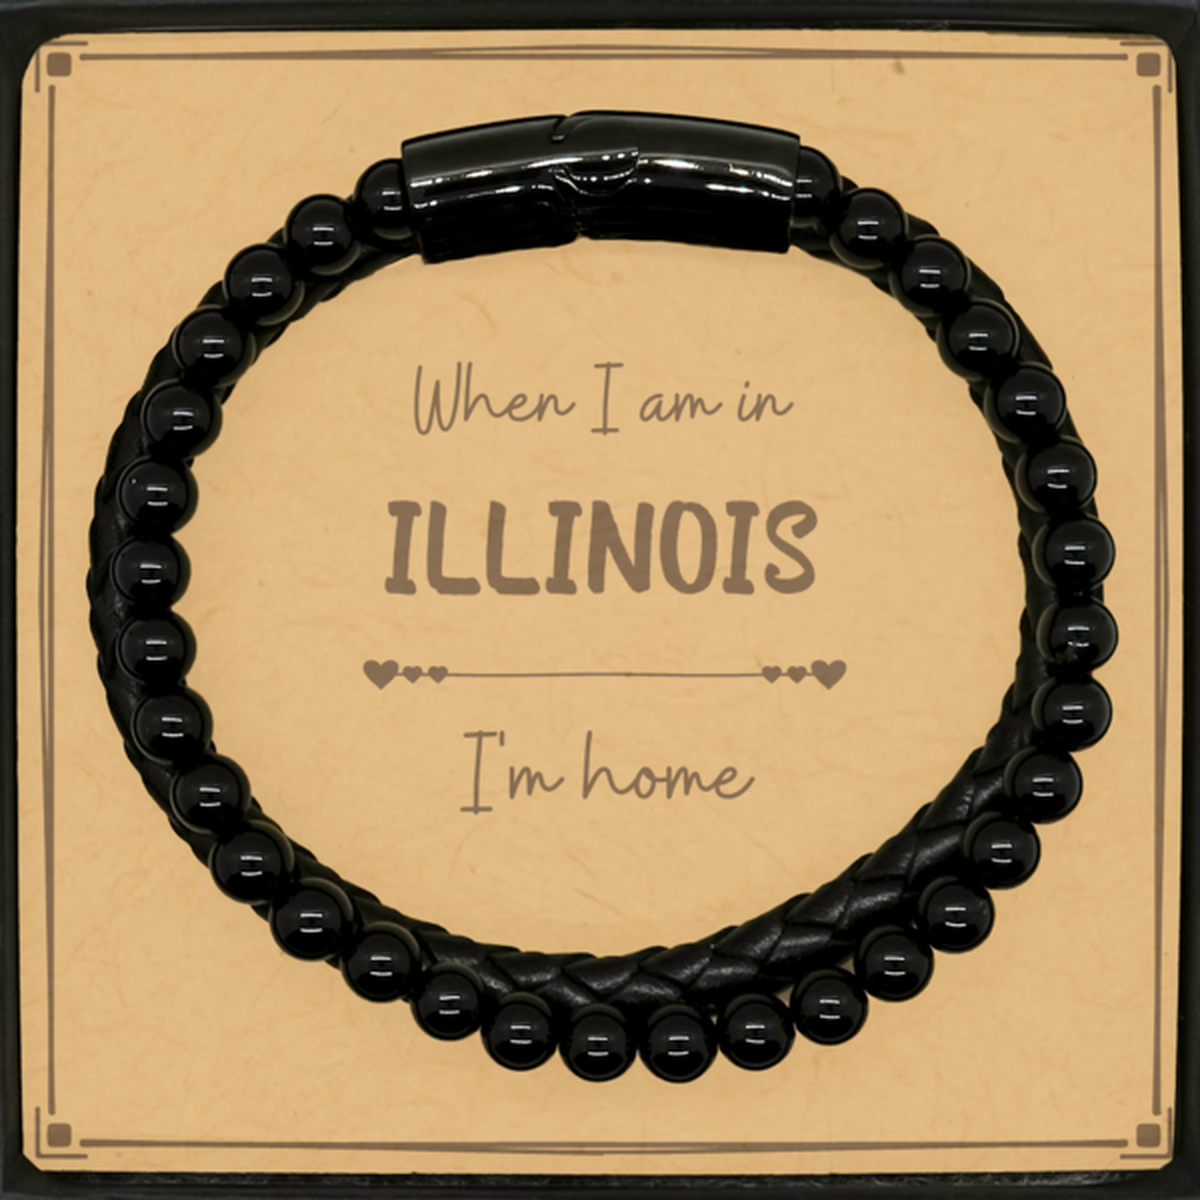 When I am in Illinois I'm home Stone Leather Bracelets, Message Card Gifts For Illinois, State Illinois Birthday Gifts for Friends Coworker